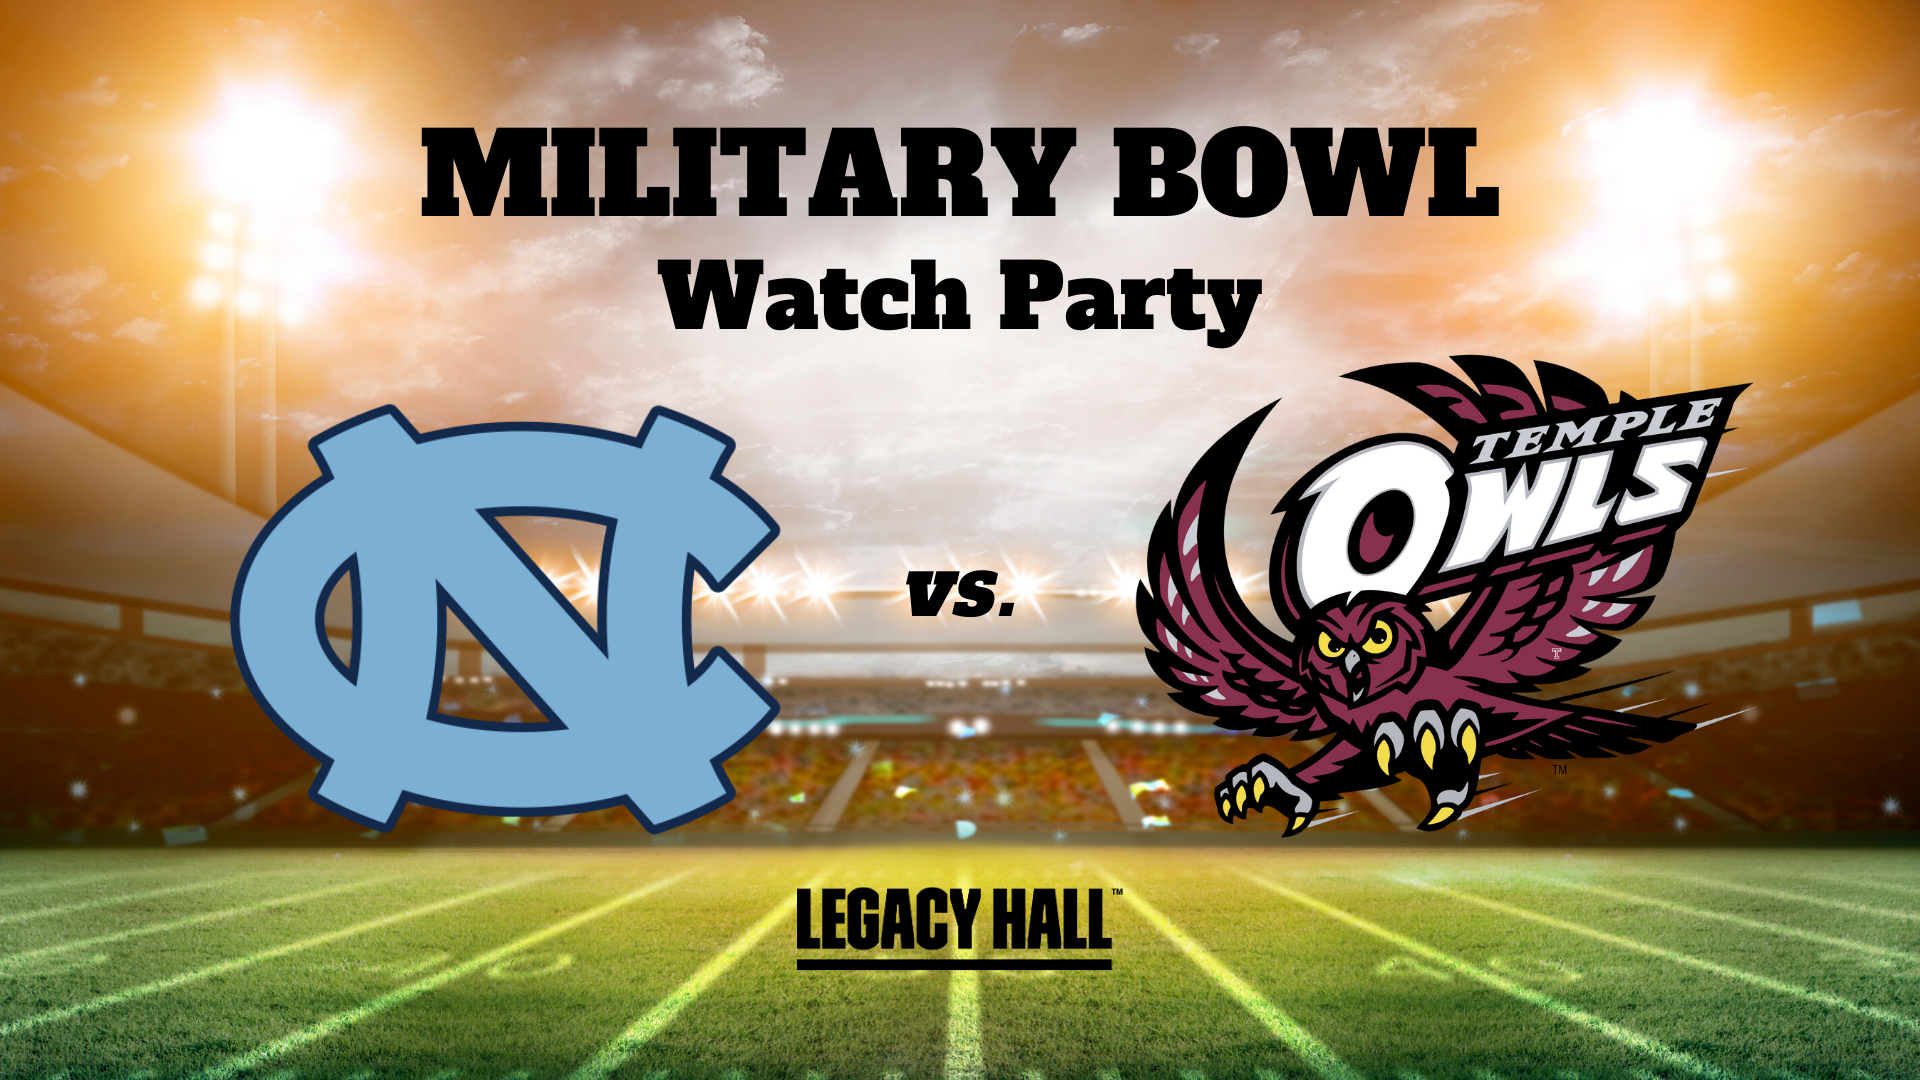 Military Bowl Watch Party - hero